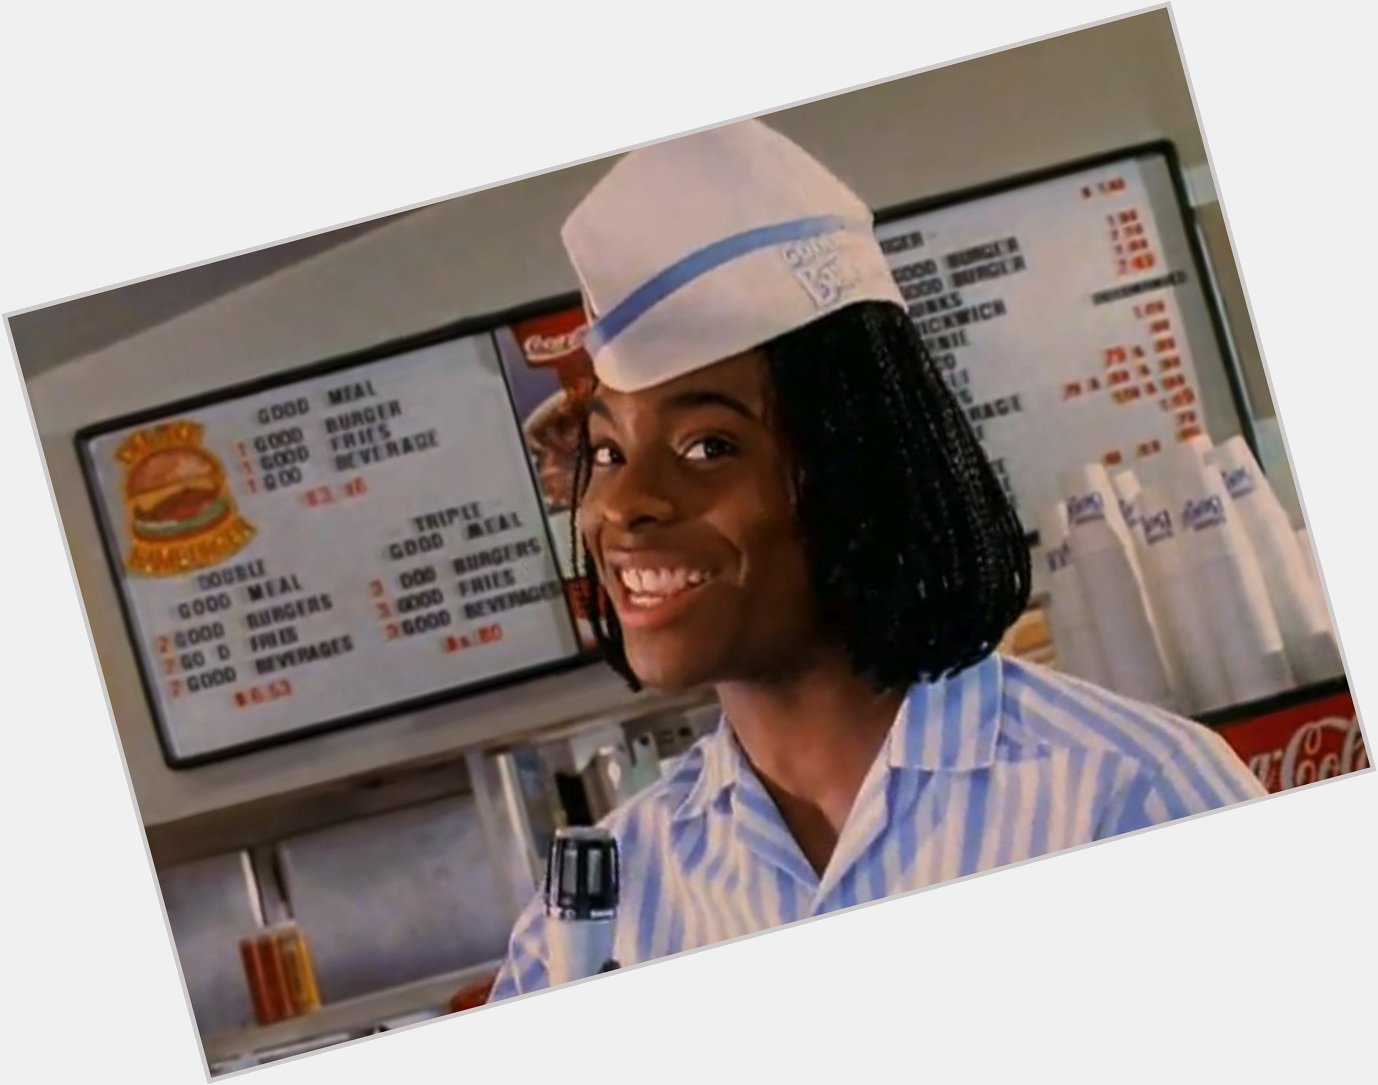 Time flies, Happy Birthday to the one and only Kel Mitchell, who turns 39 